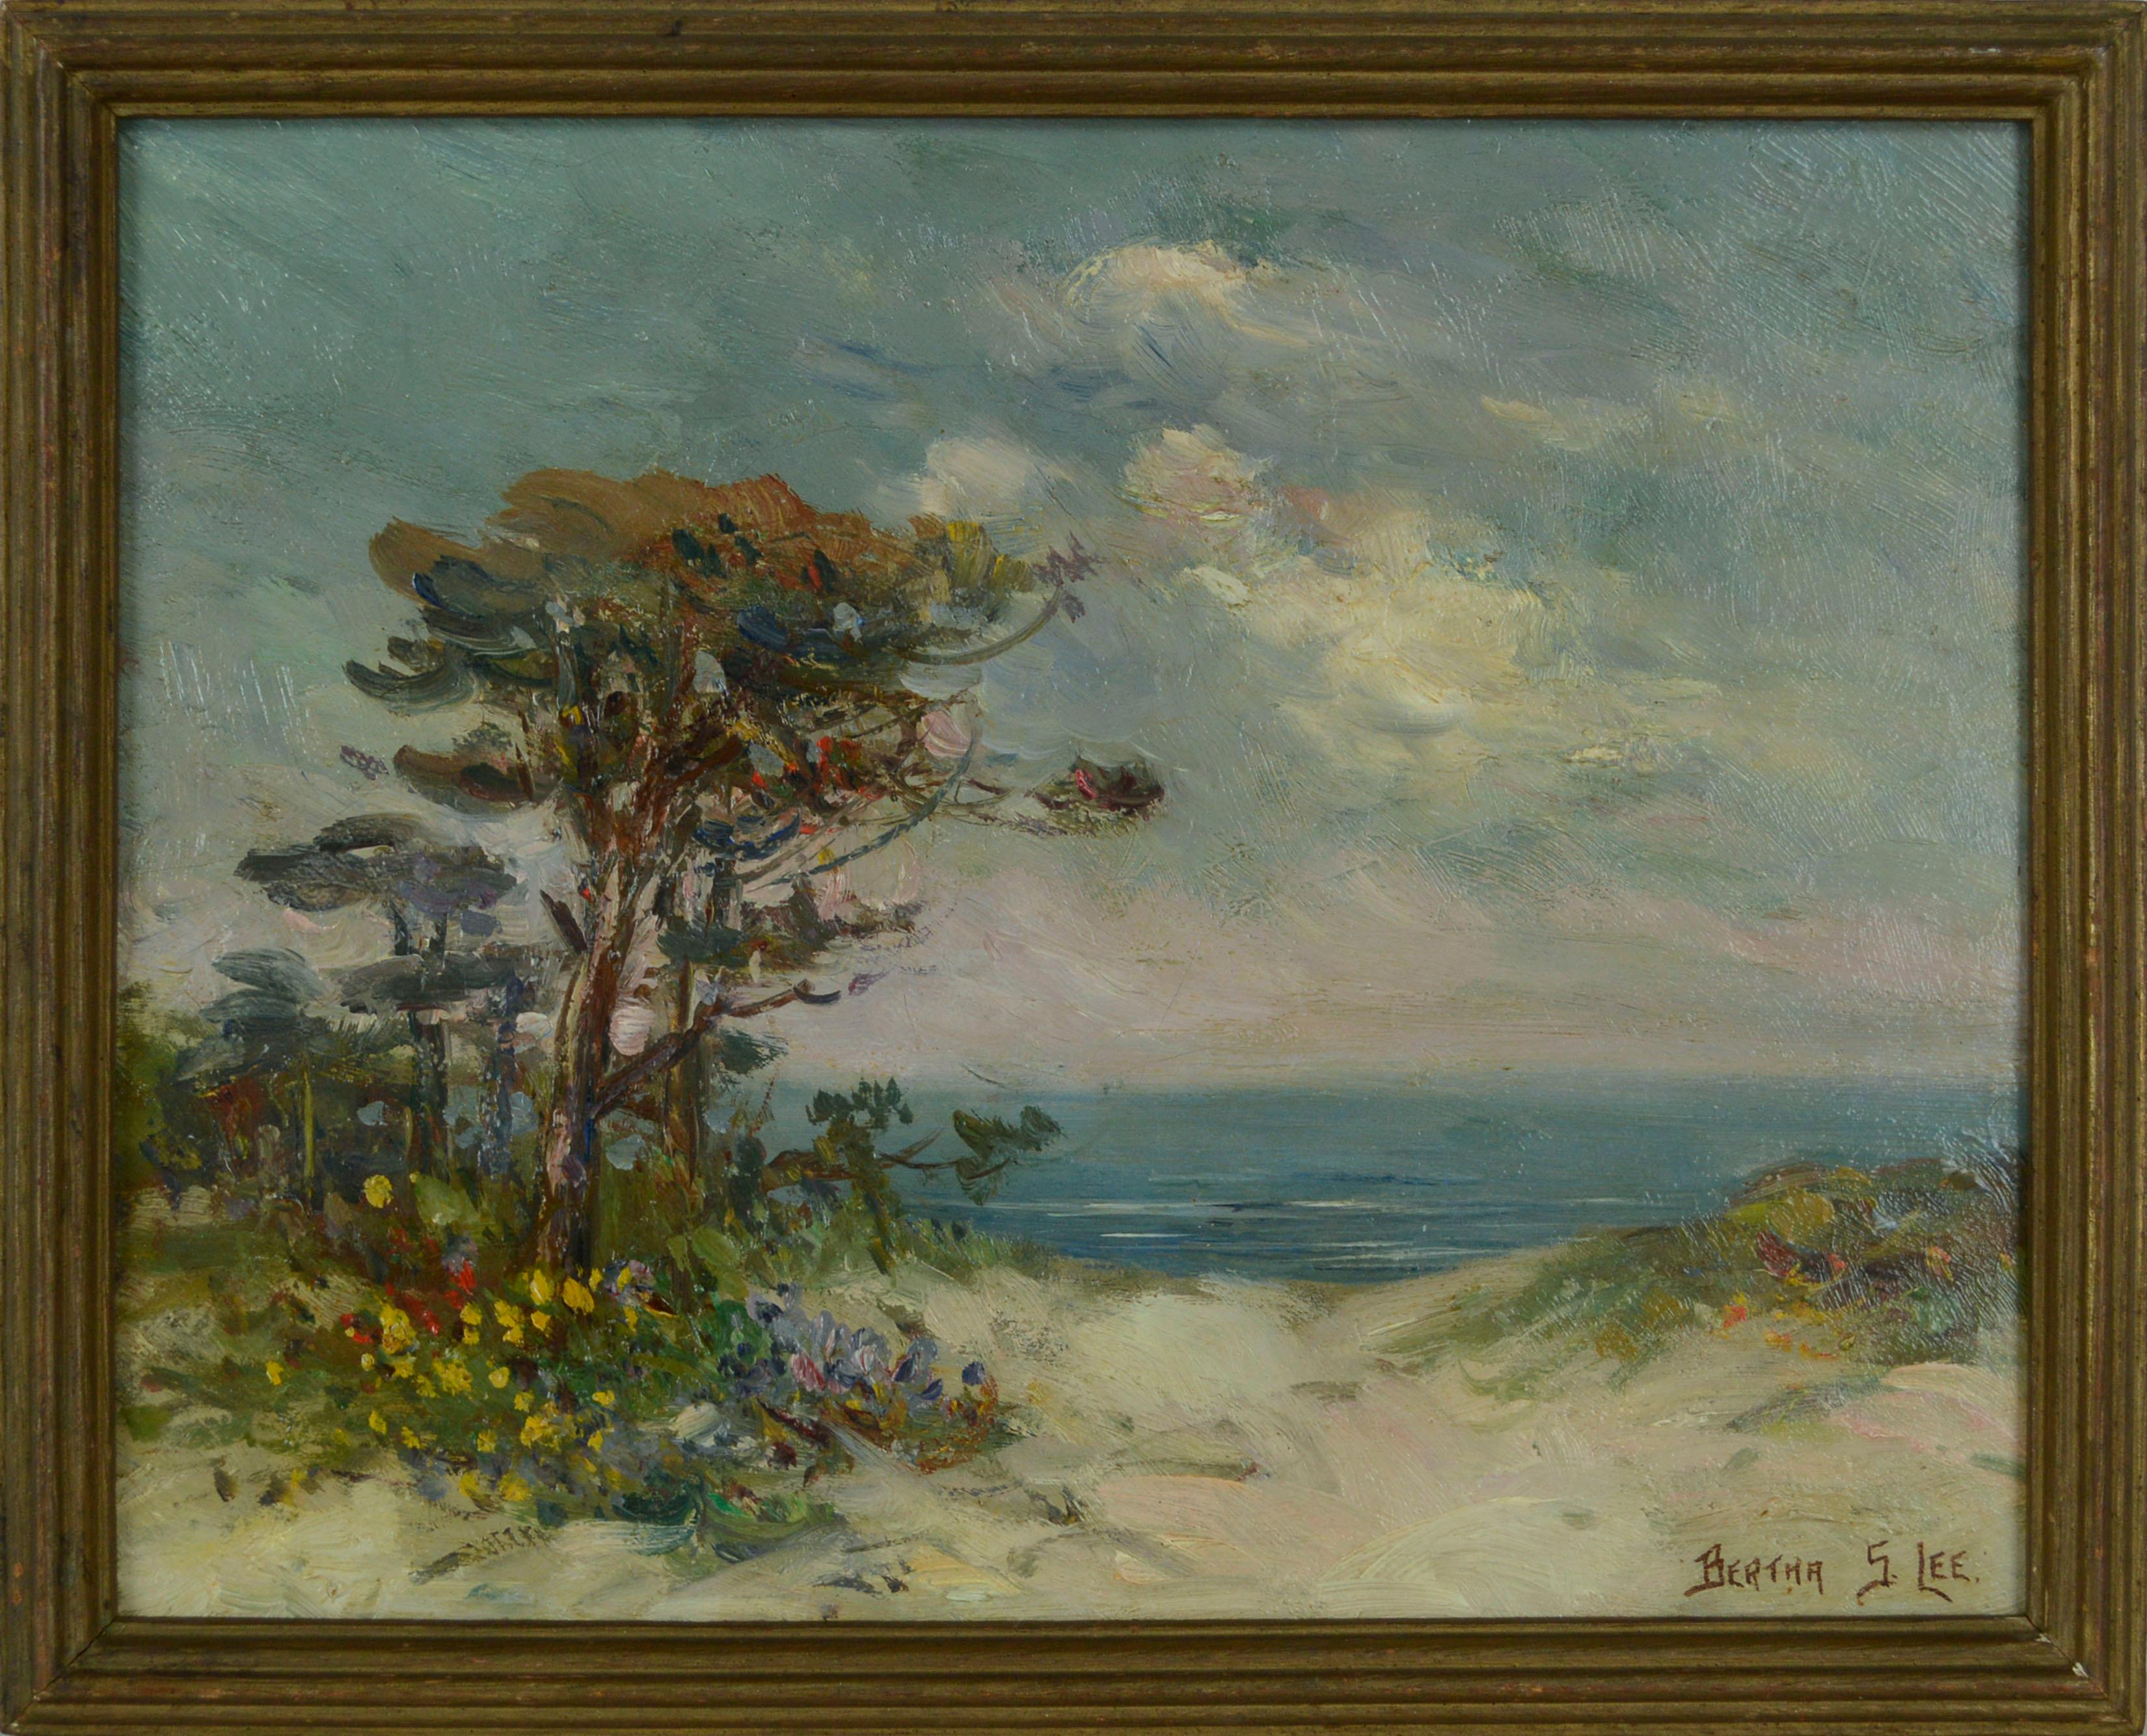 Early 20th Century Monterey Coast Landscape with Cypress Tree & Wildflowers 